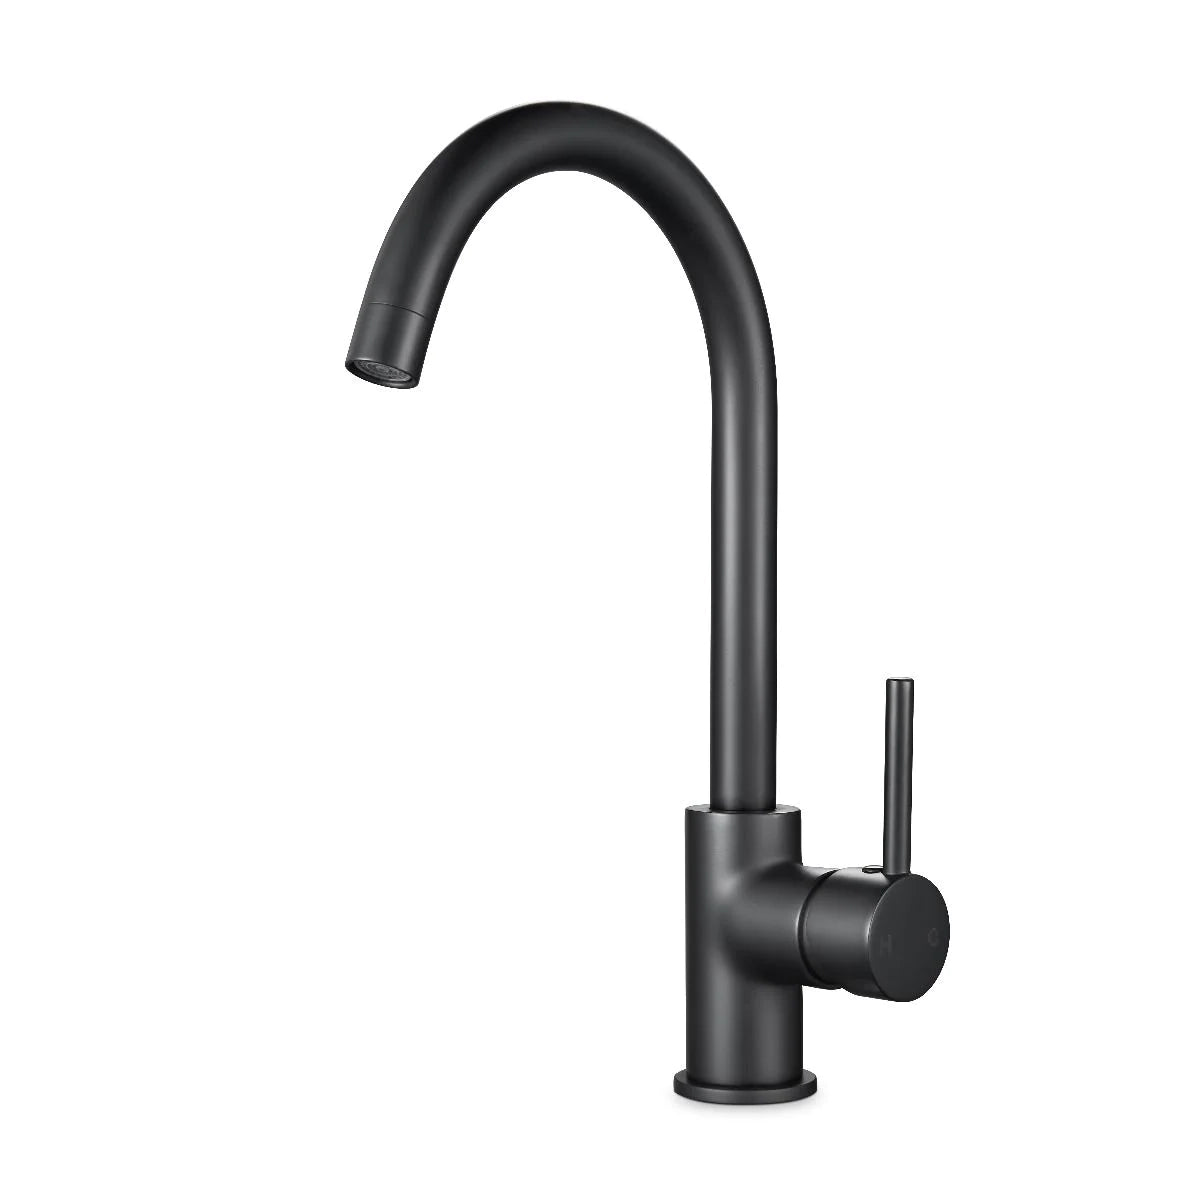 Round Standard Kitchen Sink Mixer Tap: Classic and practical addition to your kitchen setup-OX1026.KM